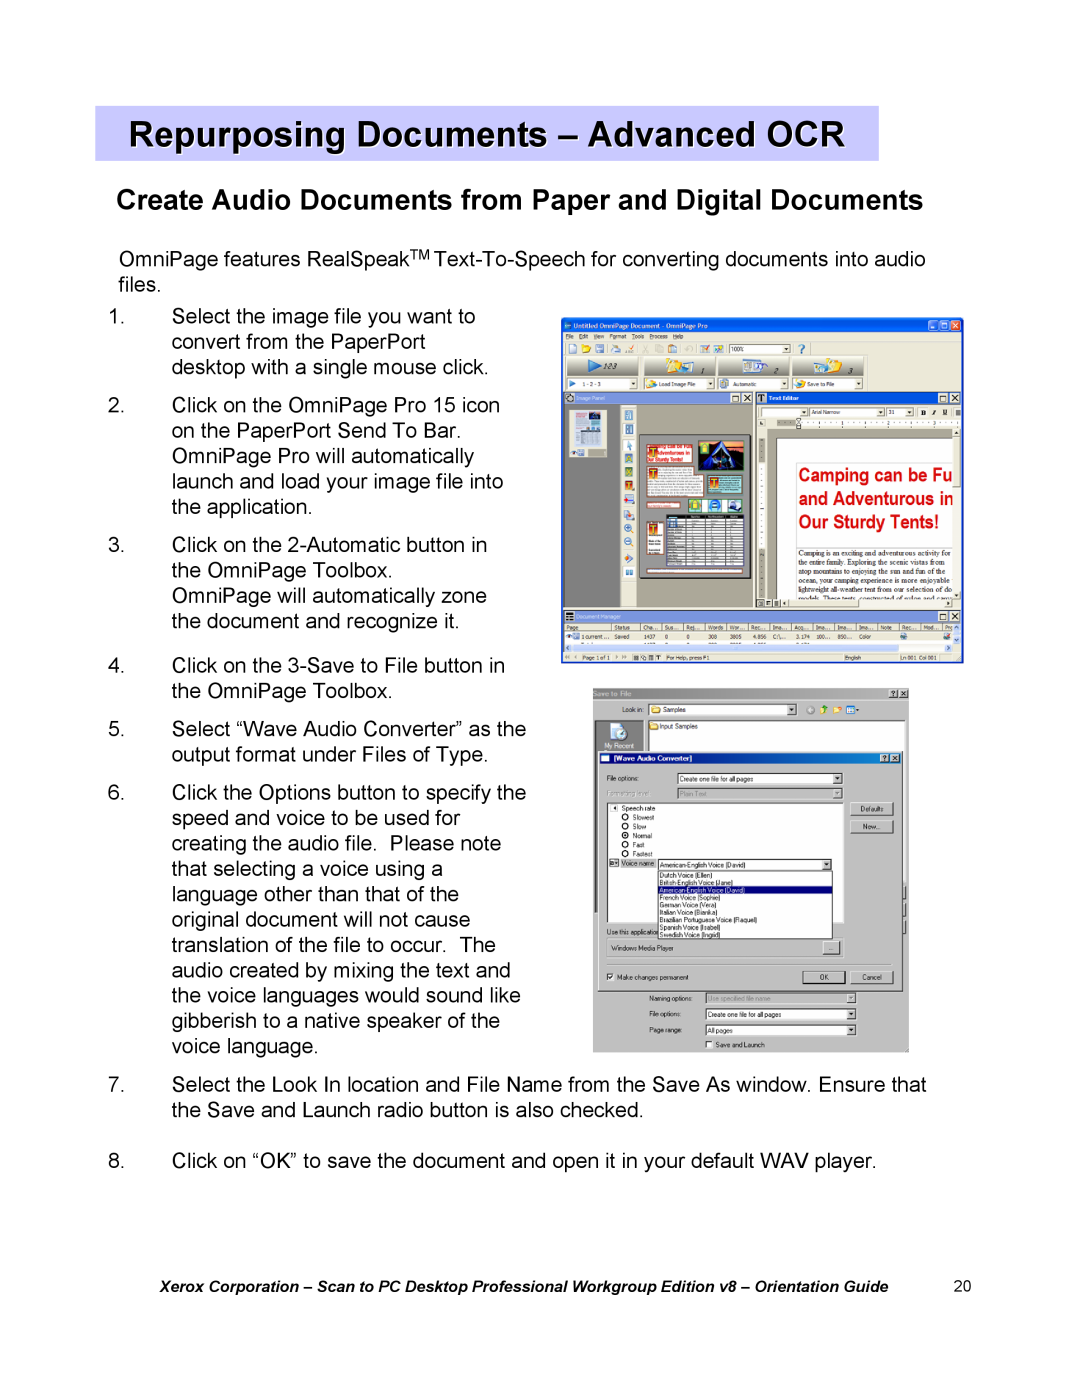 Xerox G8144Z manual Create Audio Documents from Paper and Digital Documents, Repurposing Documents -Advanced OCR 